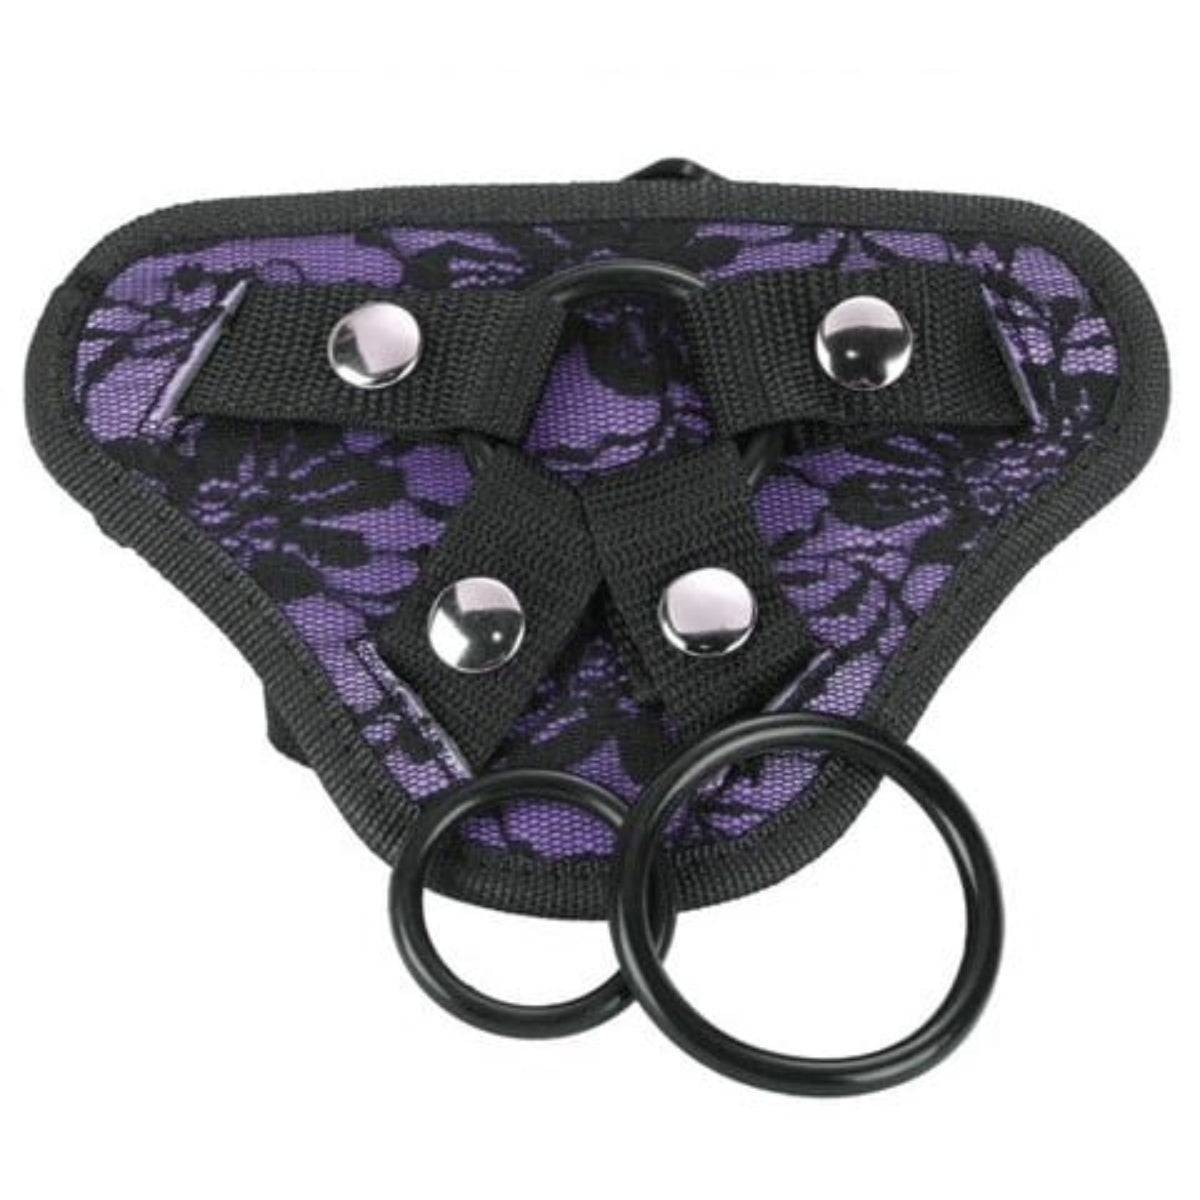 Me You Us Lace Adjustable Harness With Bullet Pocket Purple - Simply Pleasure